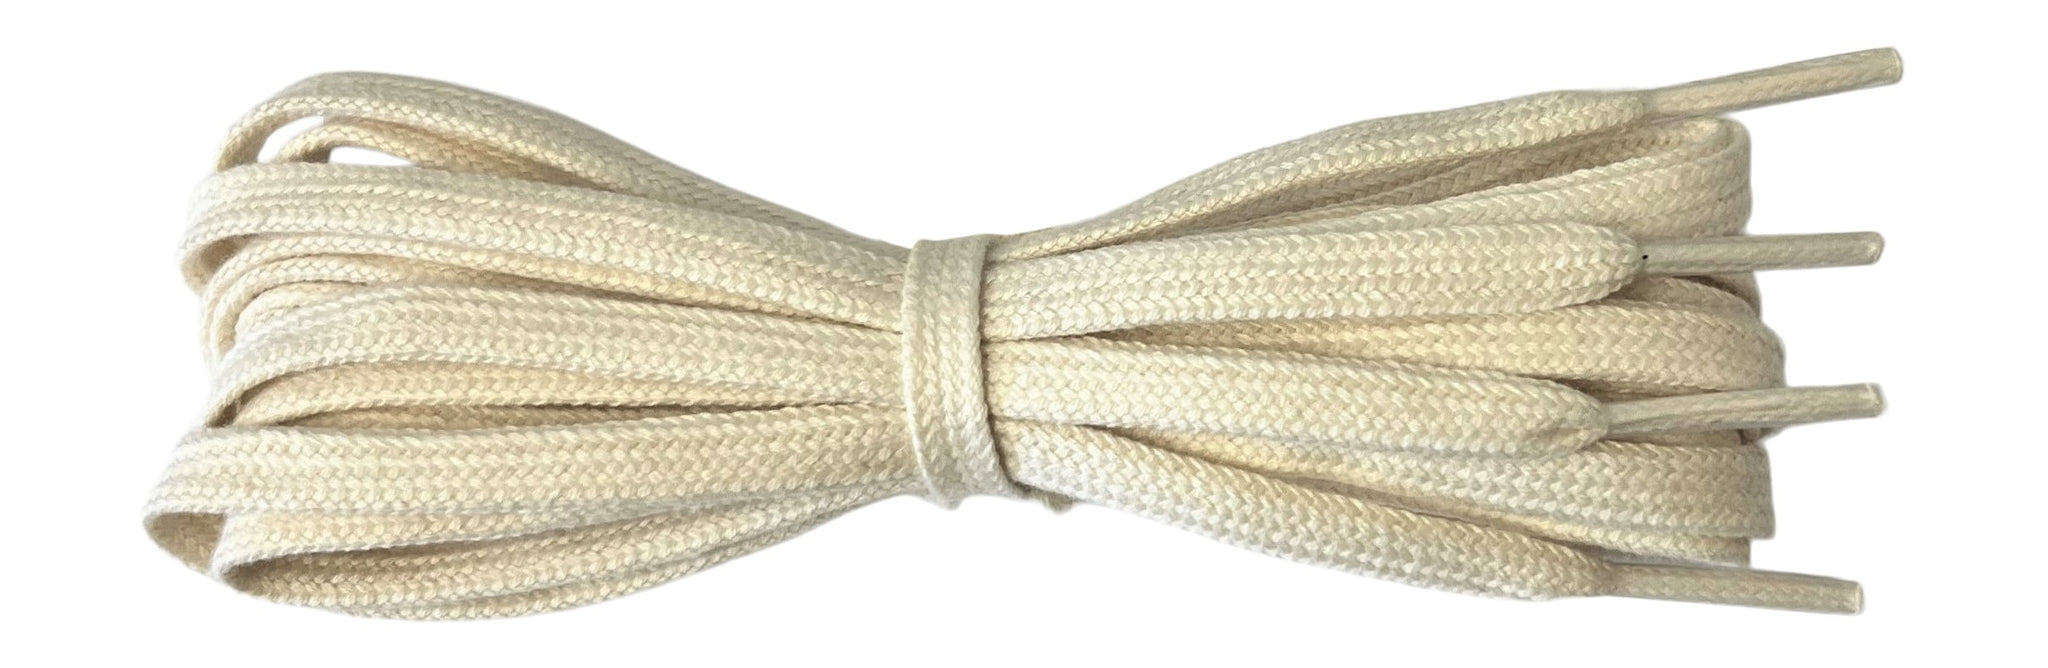 6mm Flat Natural/Cream cotton shoelaces, ideal for most Nike, Reebok, Adidas trainers - fabmania shoe laces